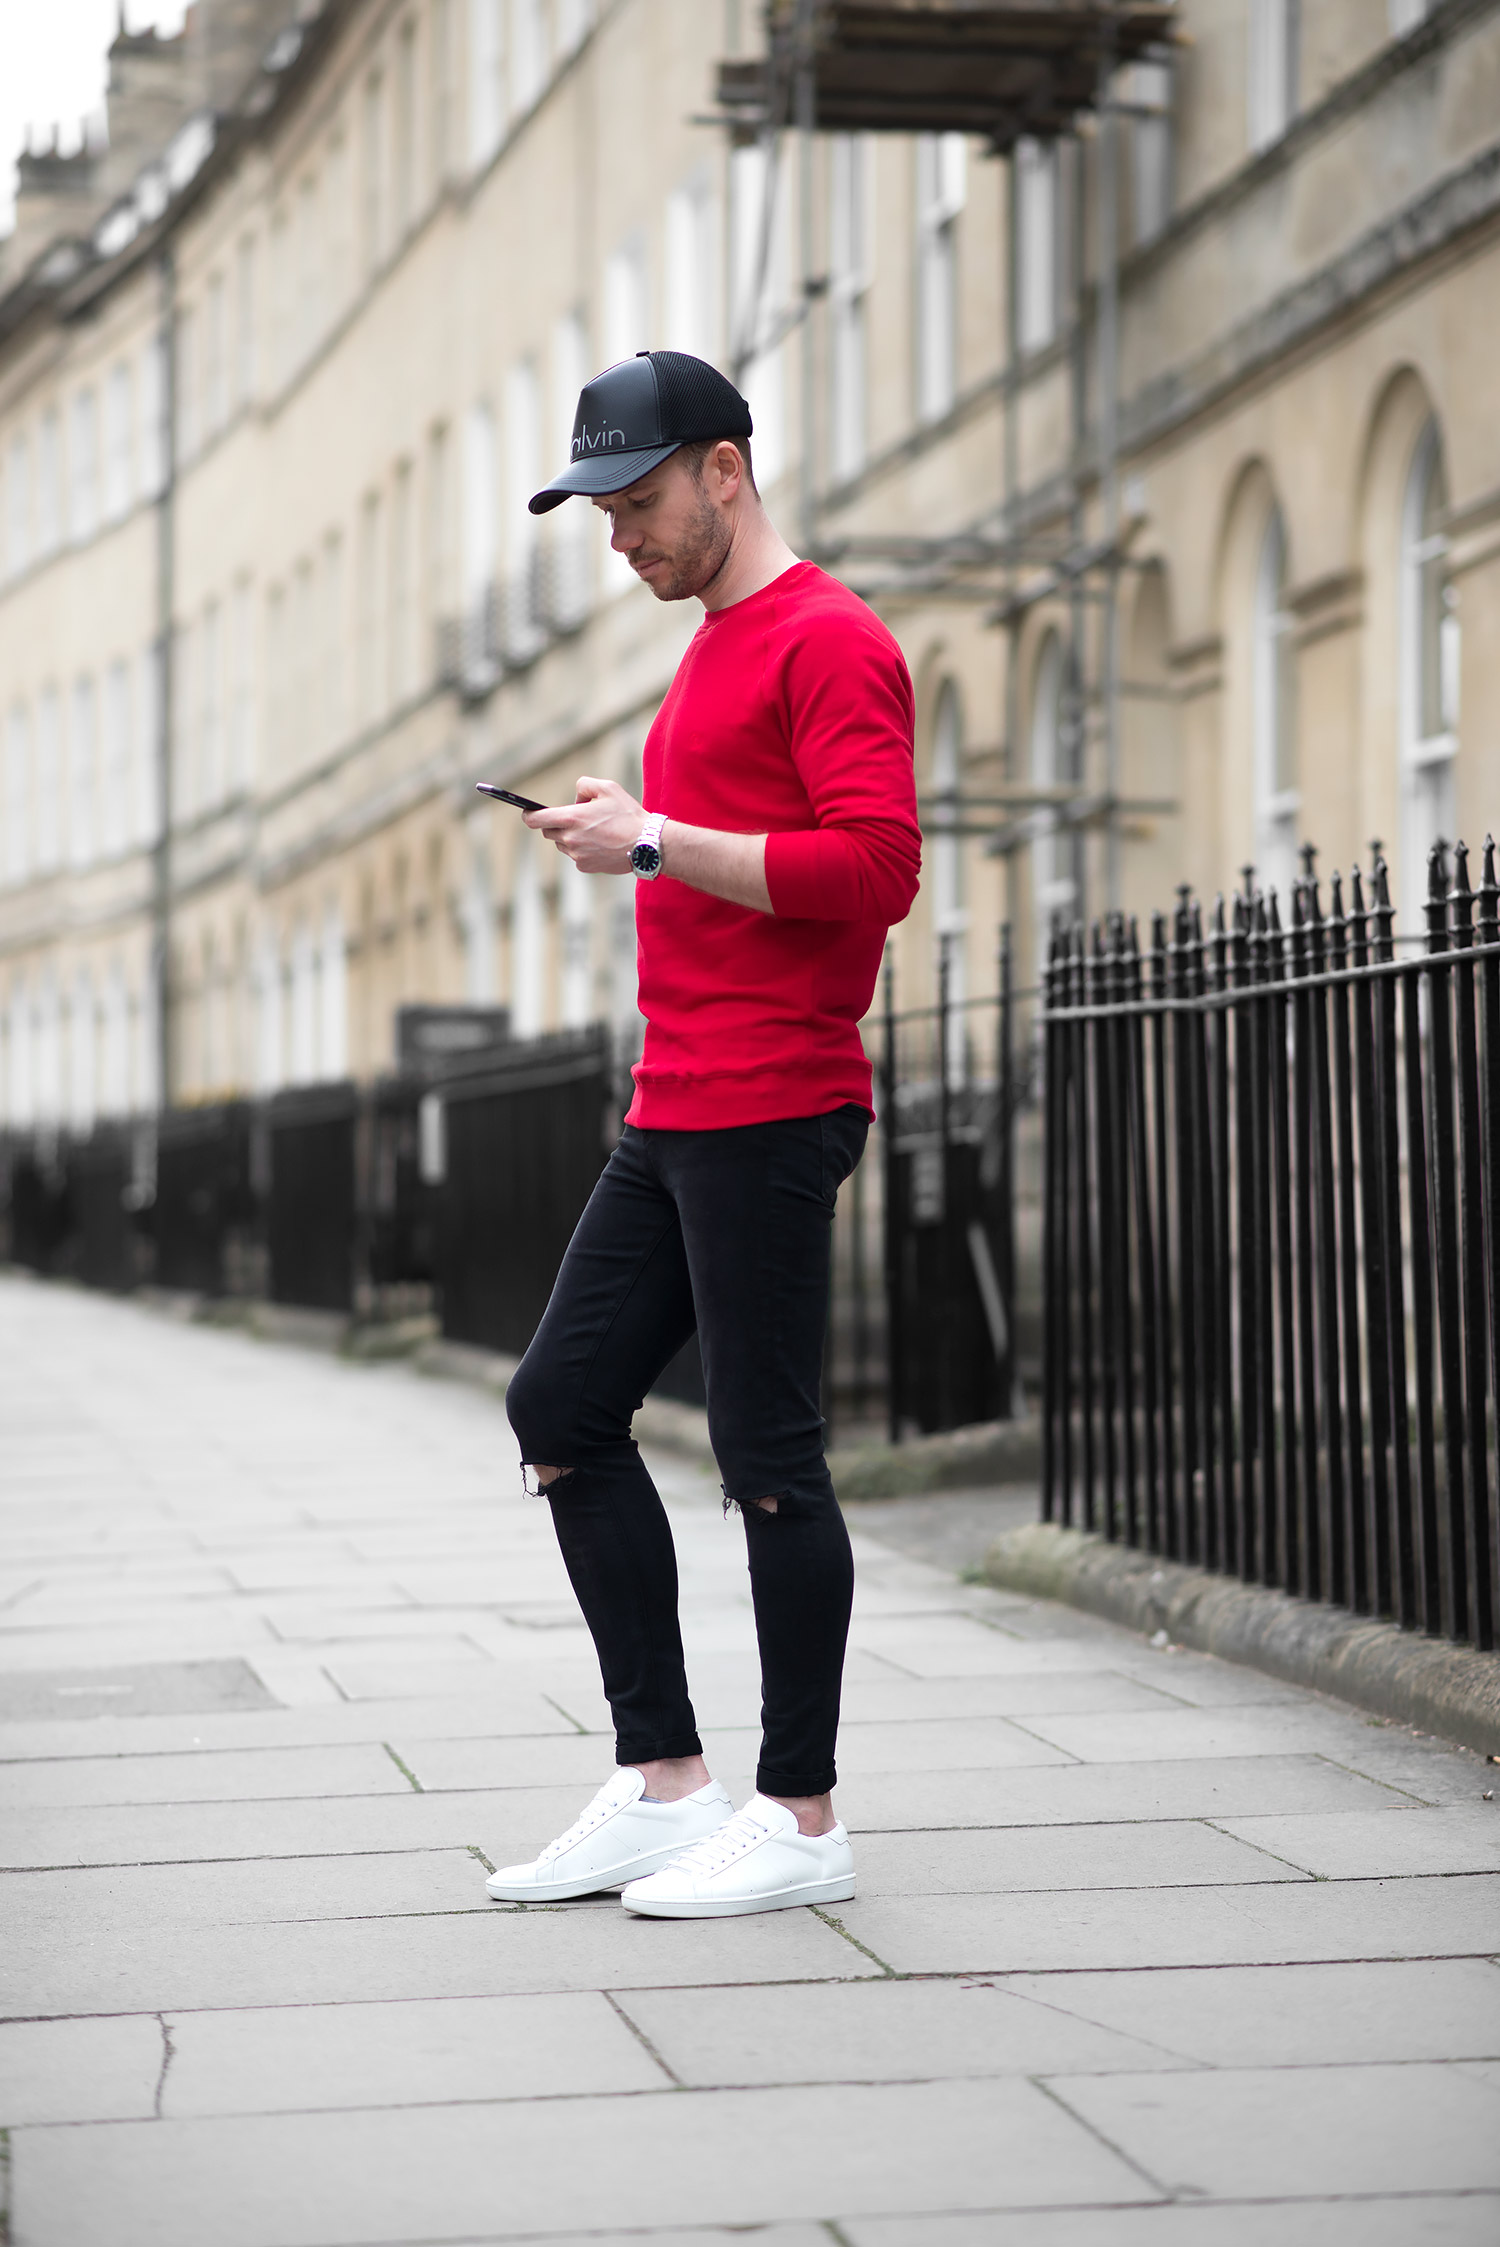 red jeans outfit men